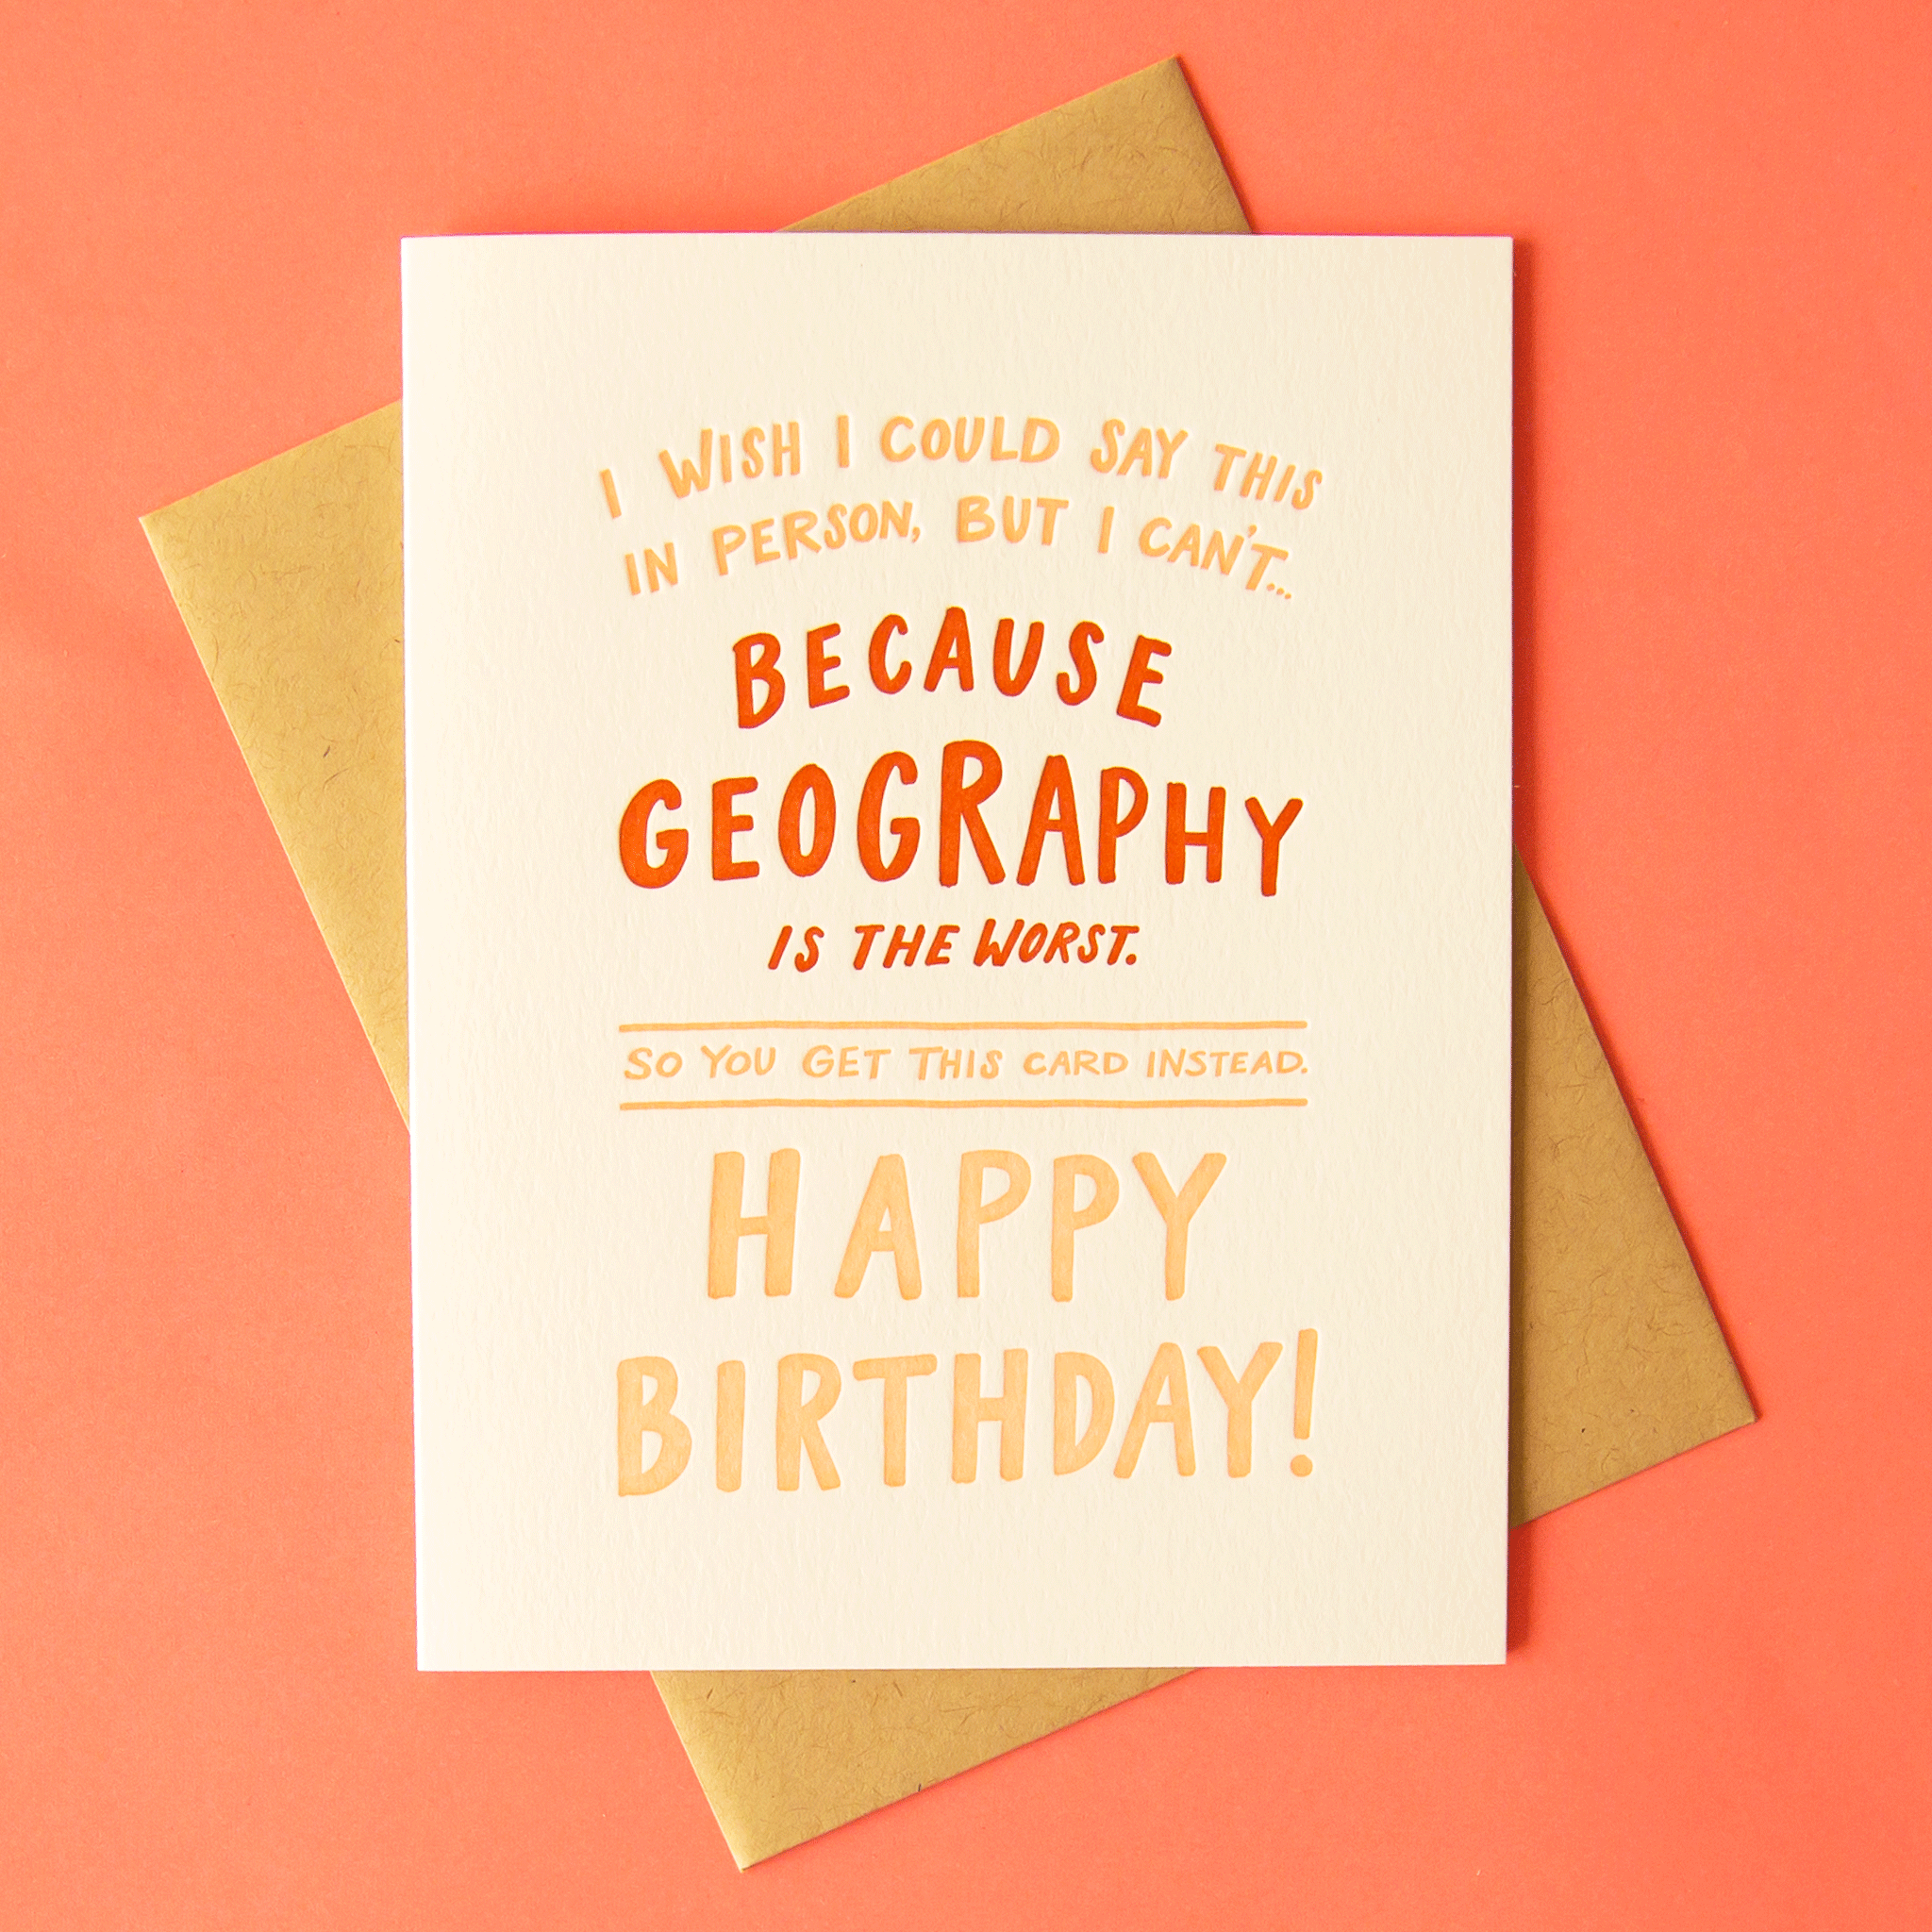 A white card with pink and red text on the front that reads, "I wish I could say this in person, but I can't... Because geography is the worst. So you get this card instead. Happy Birthday!". Also included is the coordinating light pink envelope.